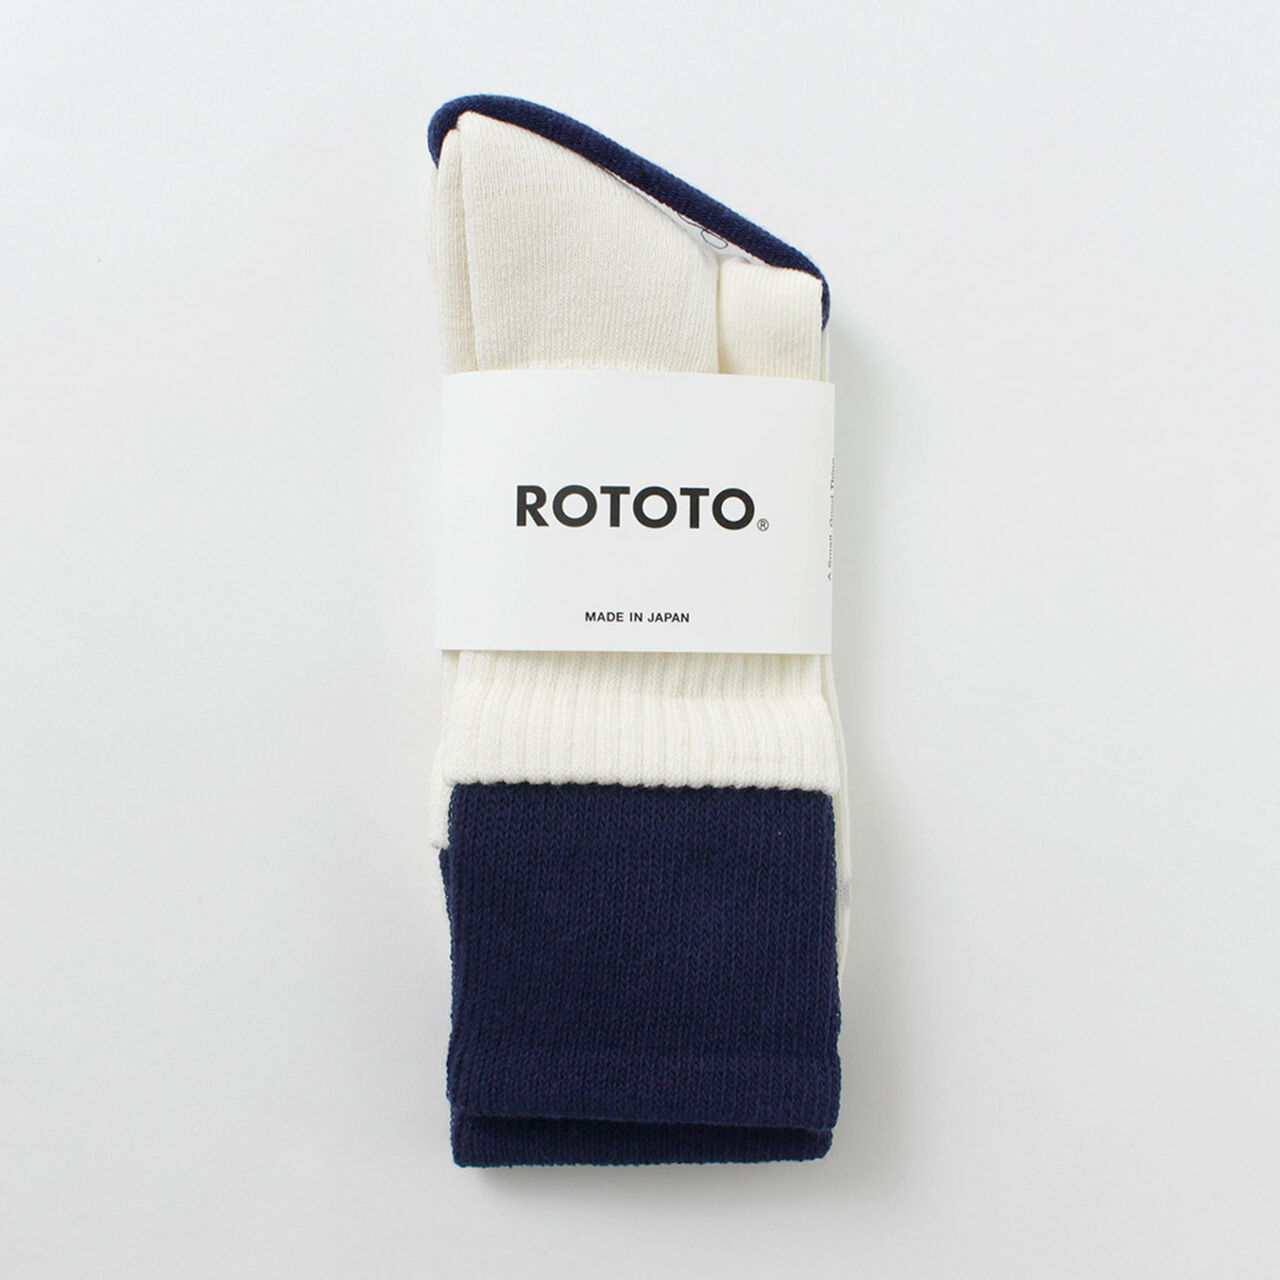 R1421 Organic cotton double layer crew socks,Navy_OffWhite, large image number 0